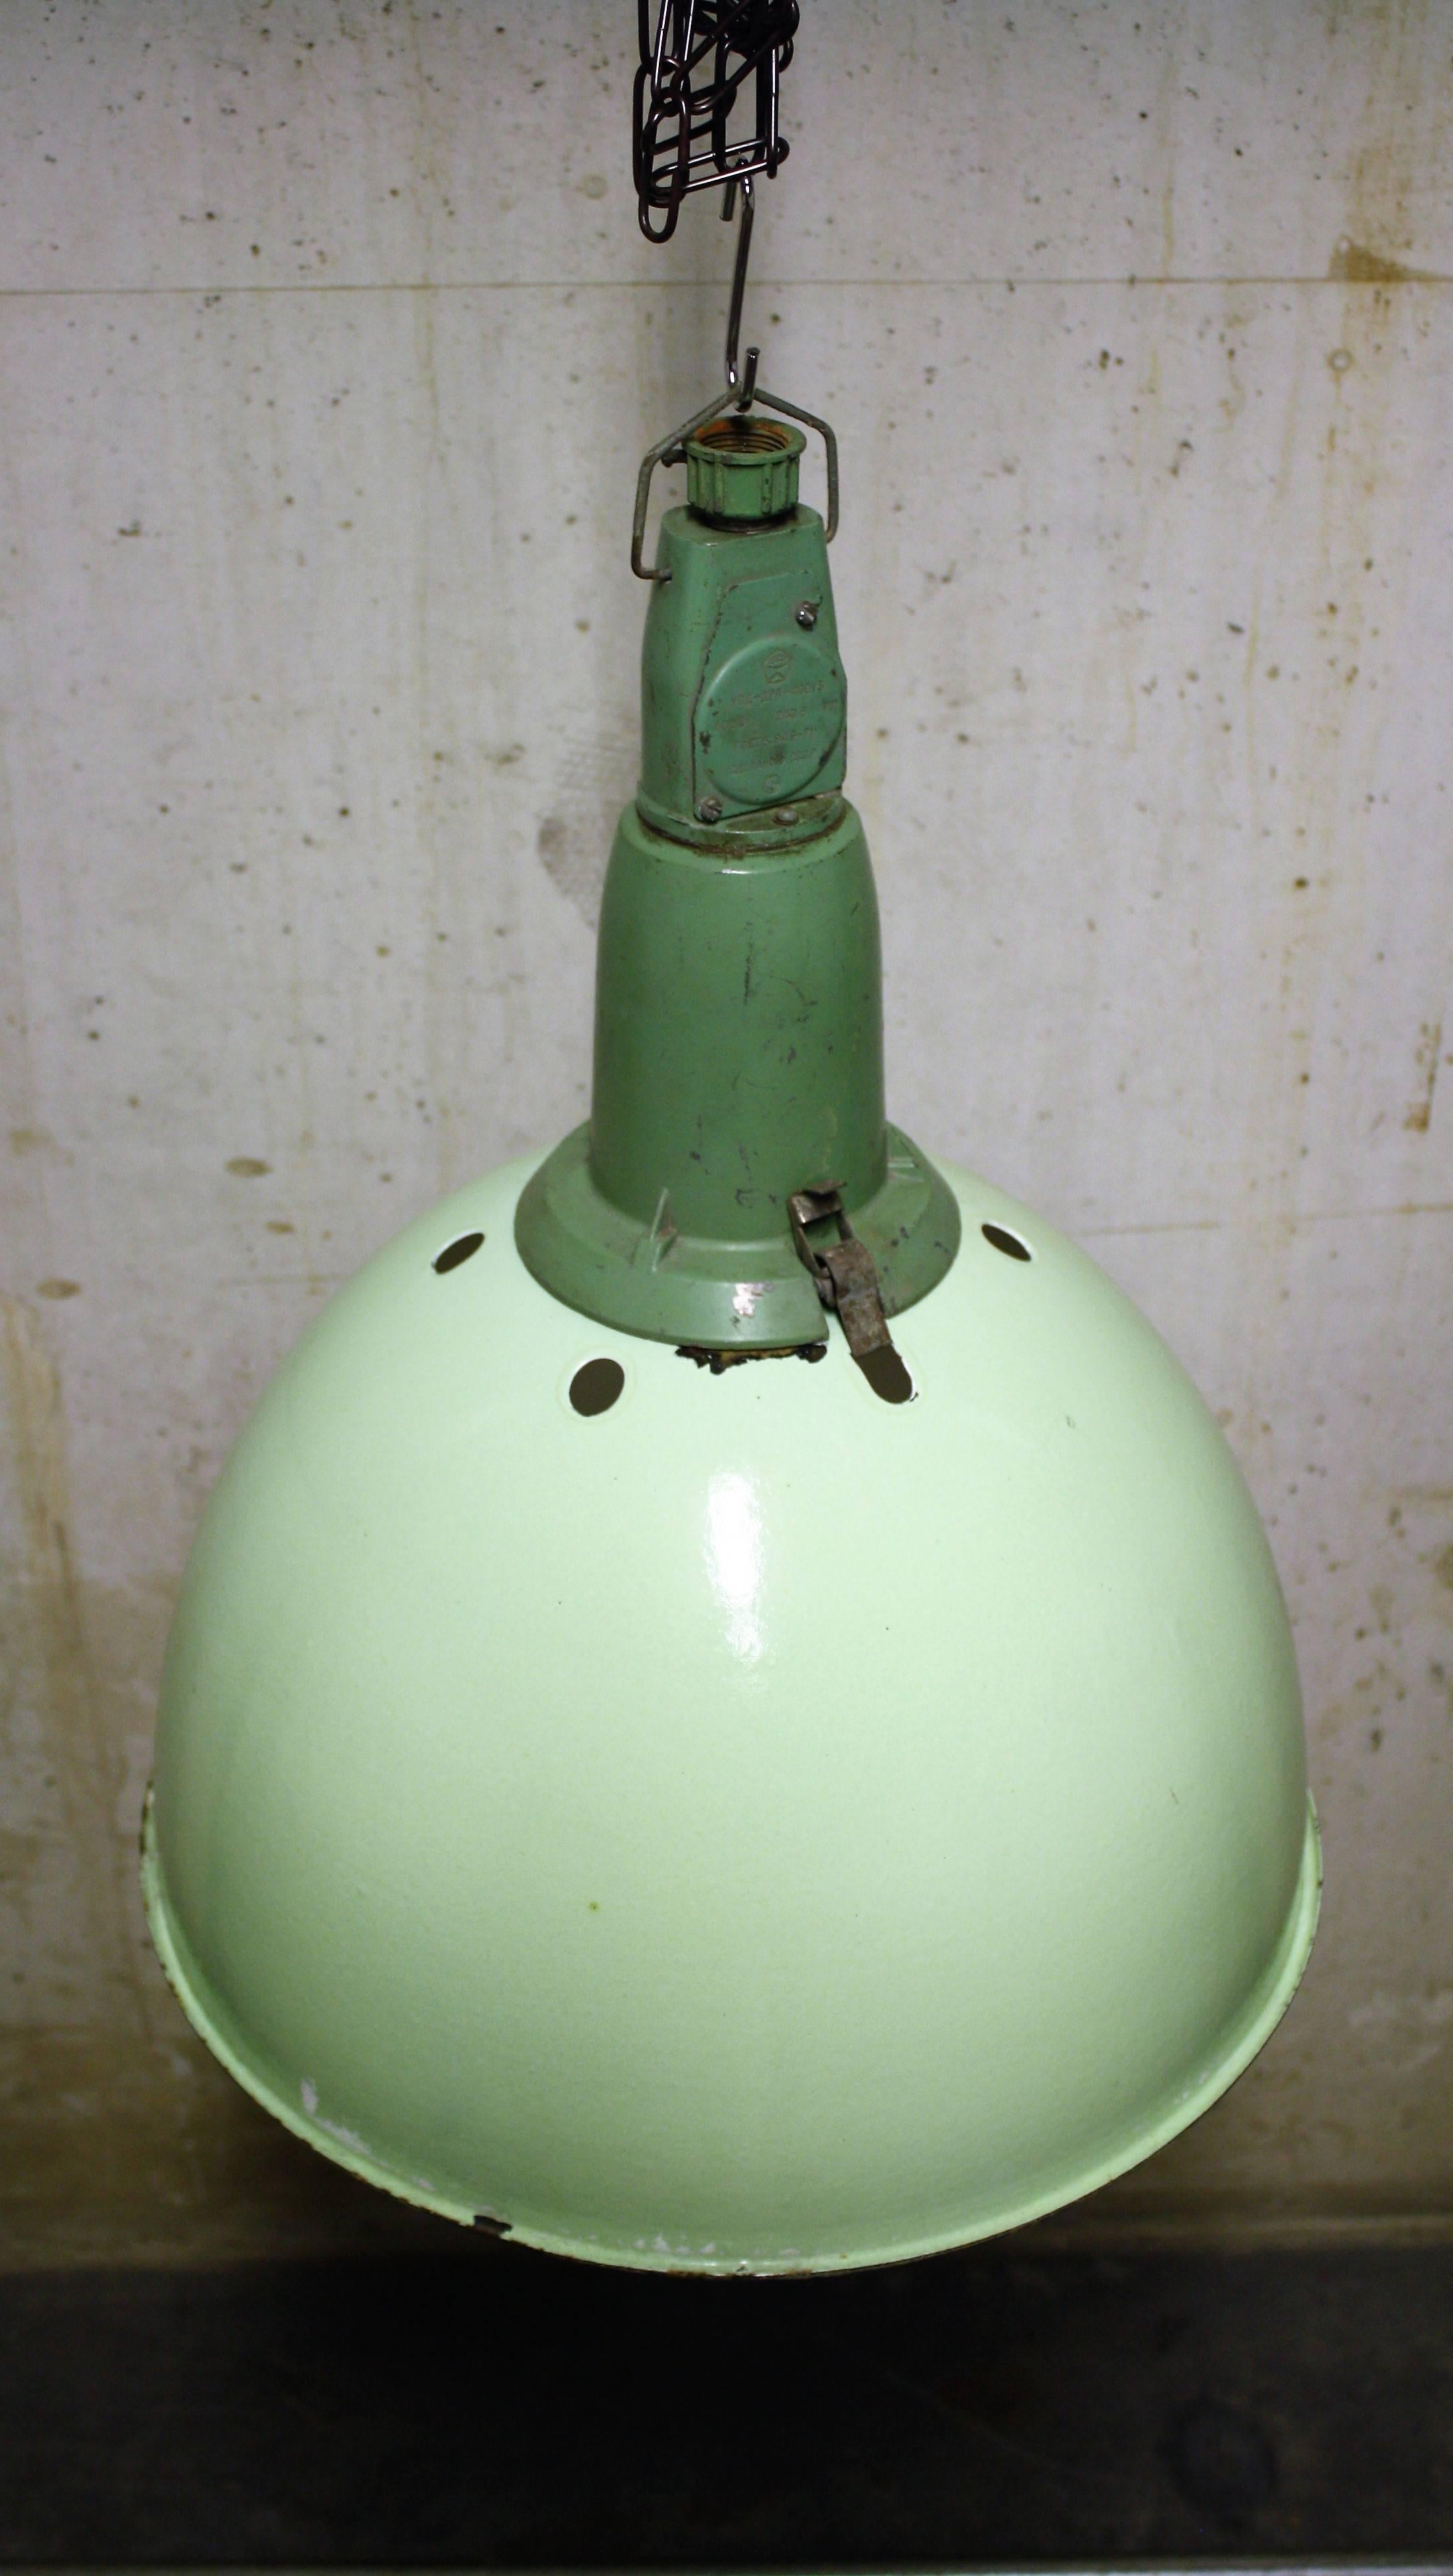 Vintage green Industrial pendant lights.

These enamel lamps used to hang in large factory buildings, offices and warehouses.

They where popular due to their shape which made it possible to mass produce them cheaply.

Originally they where